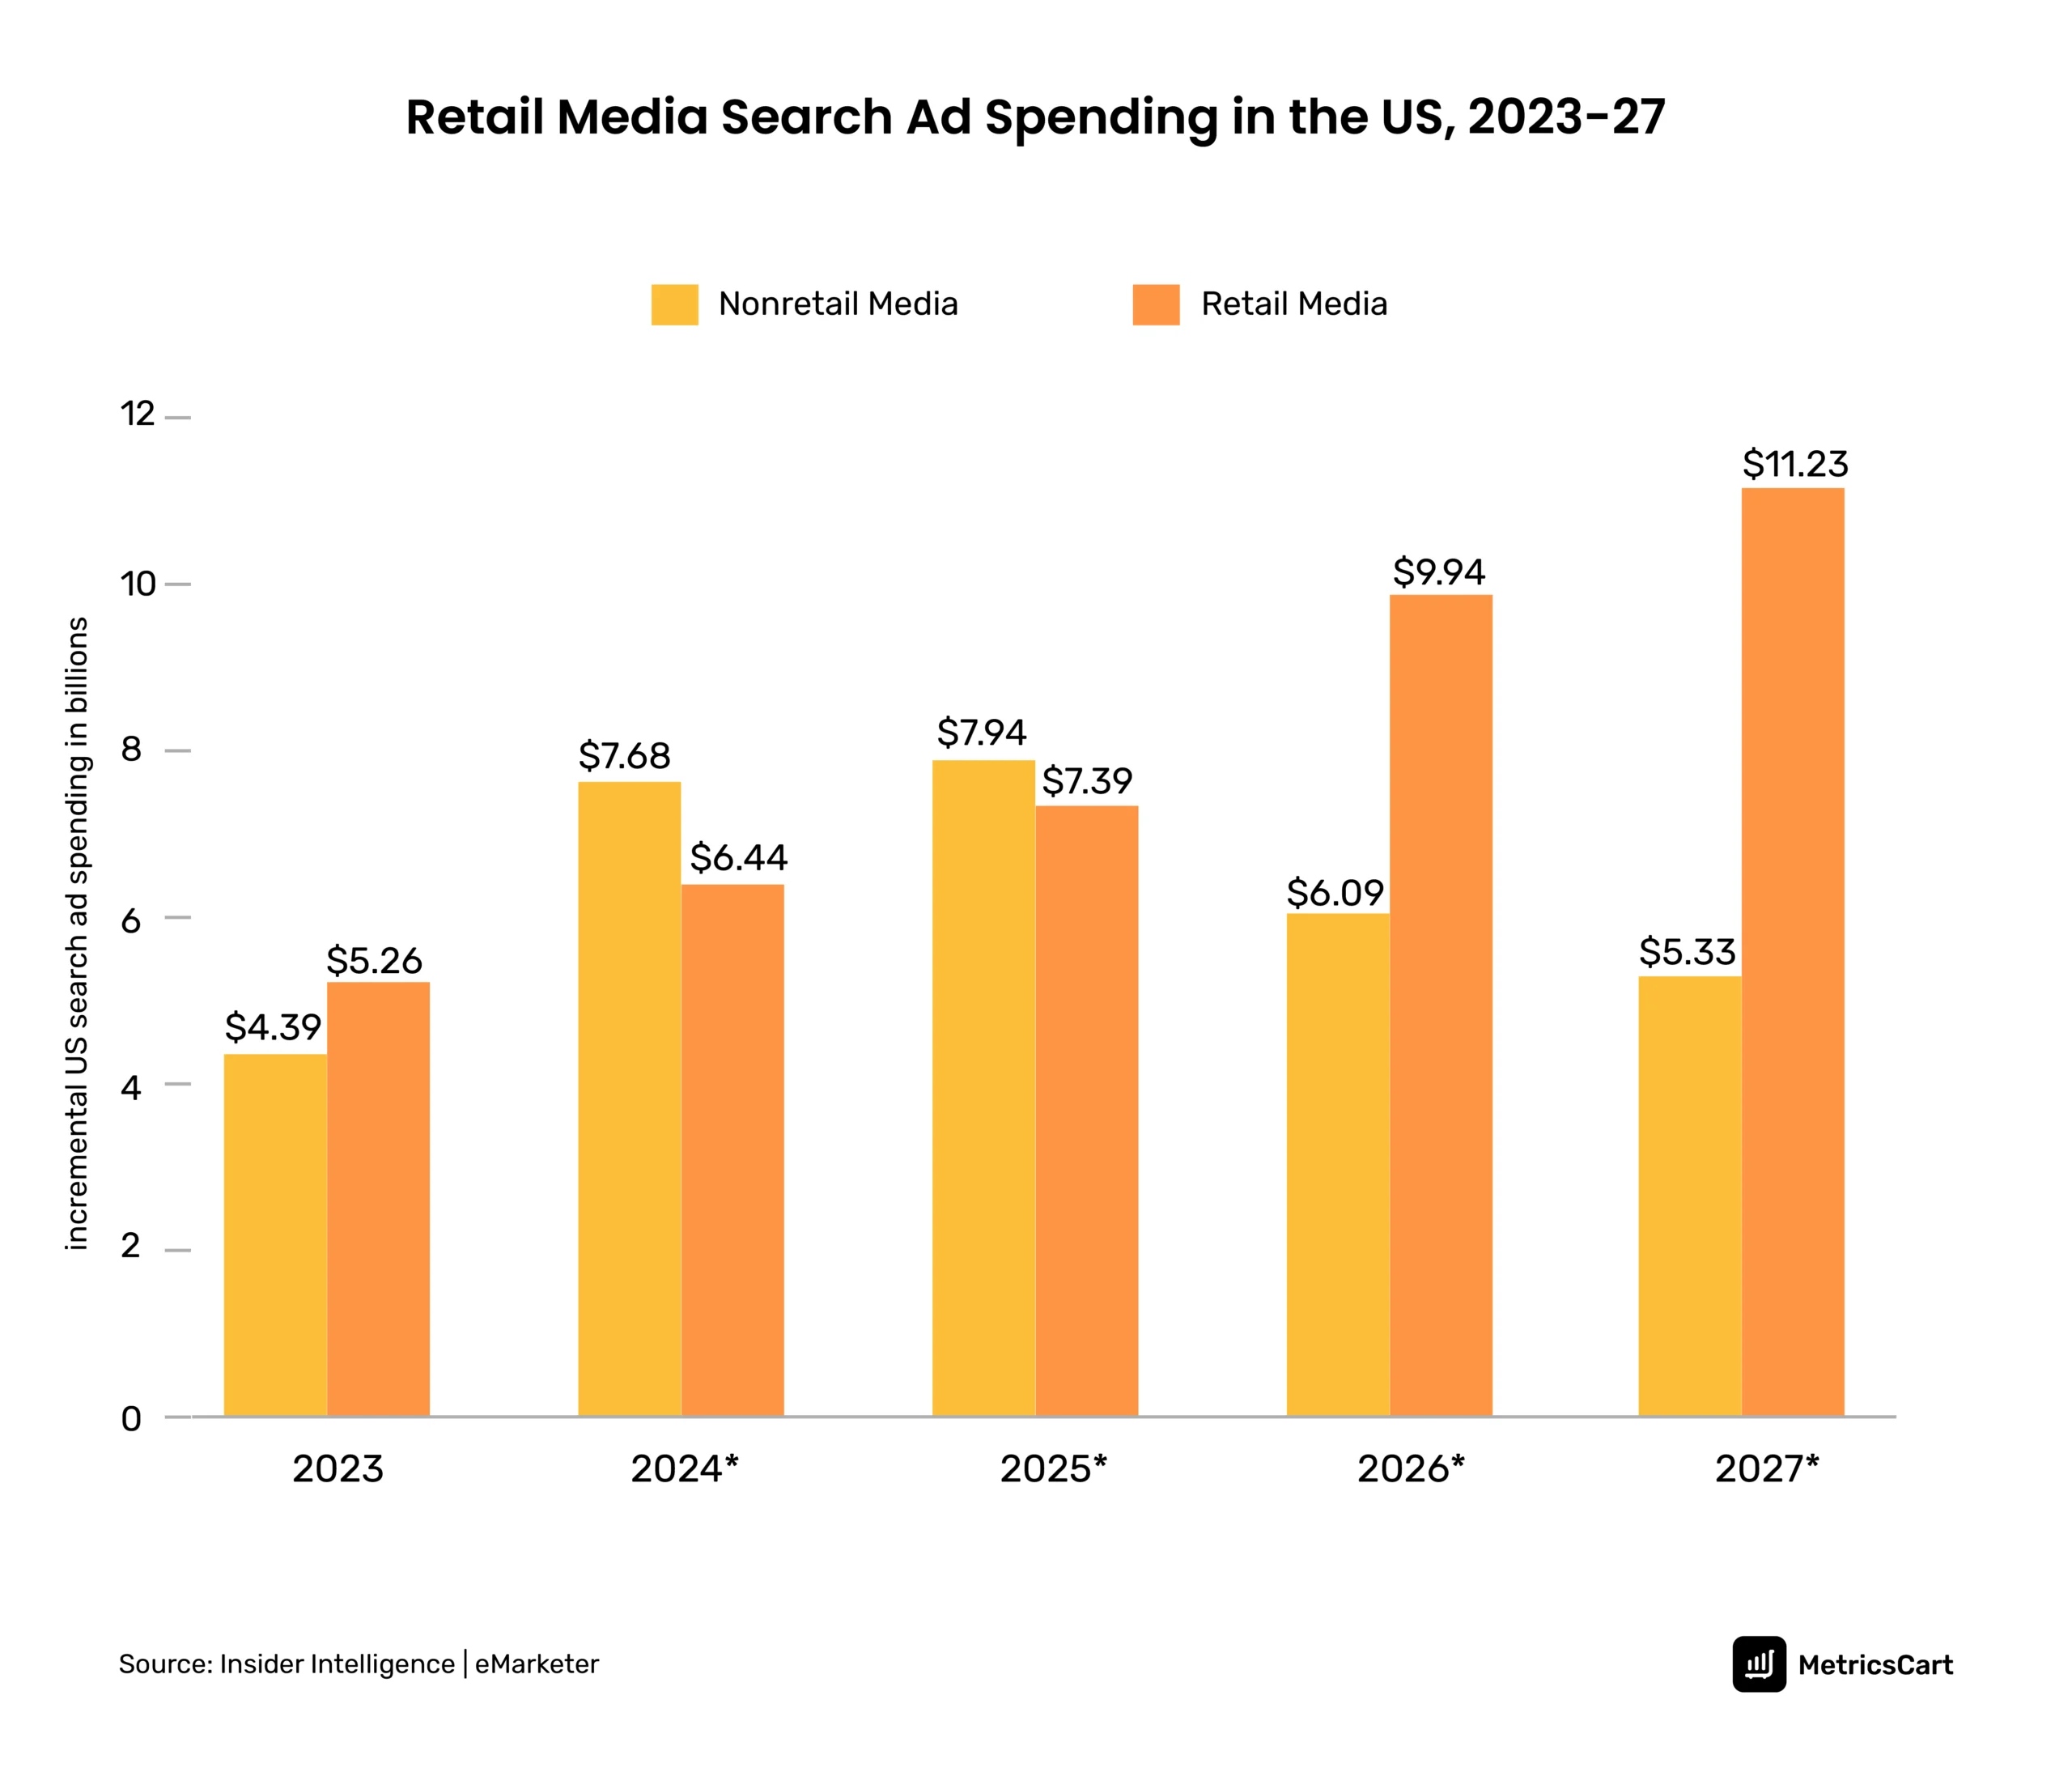 chart showing retail media, a part of shopper marketing, search ad spending in the US forecast till 2027